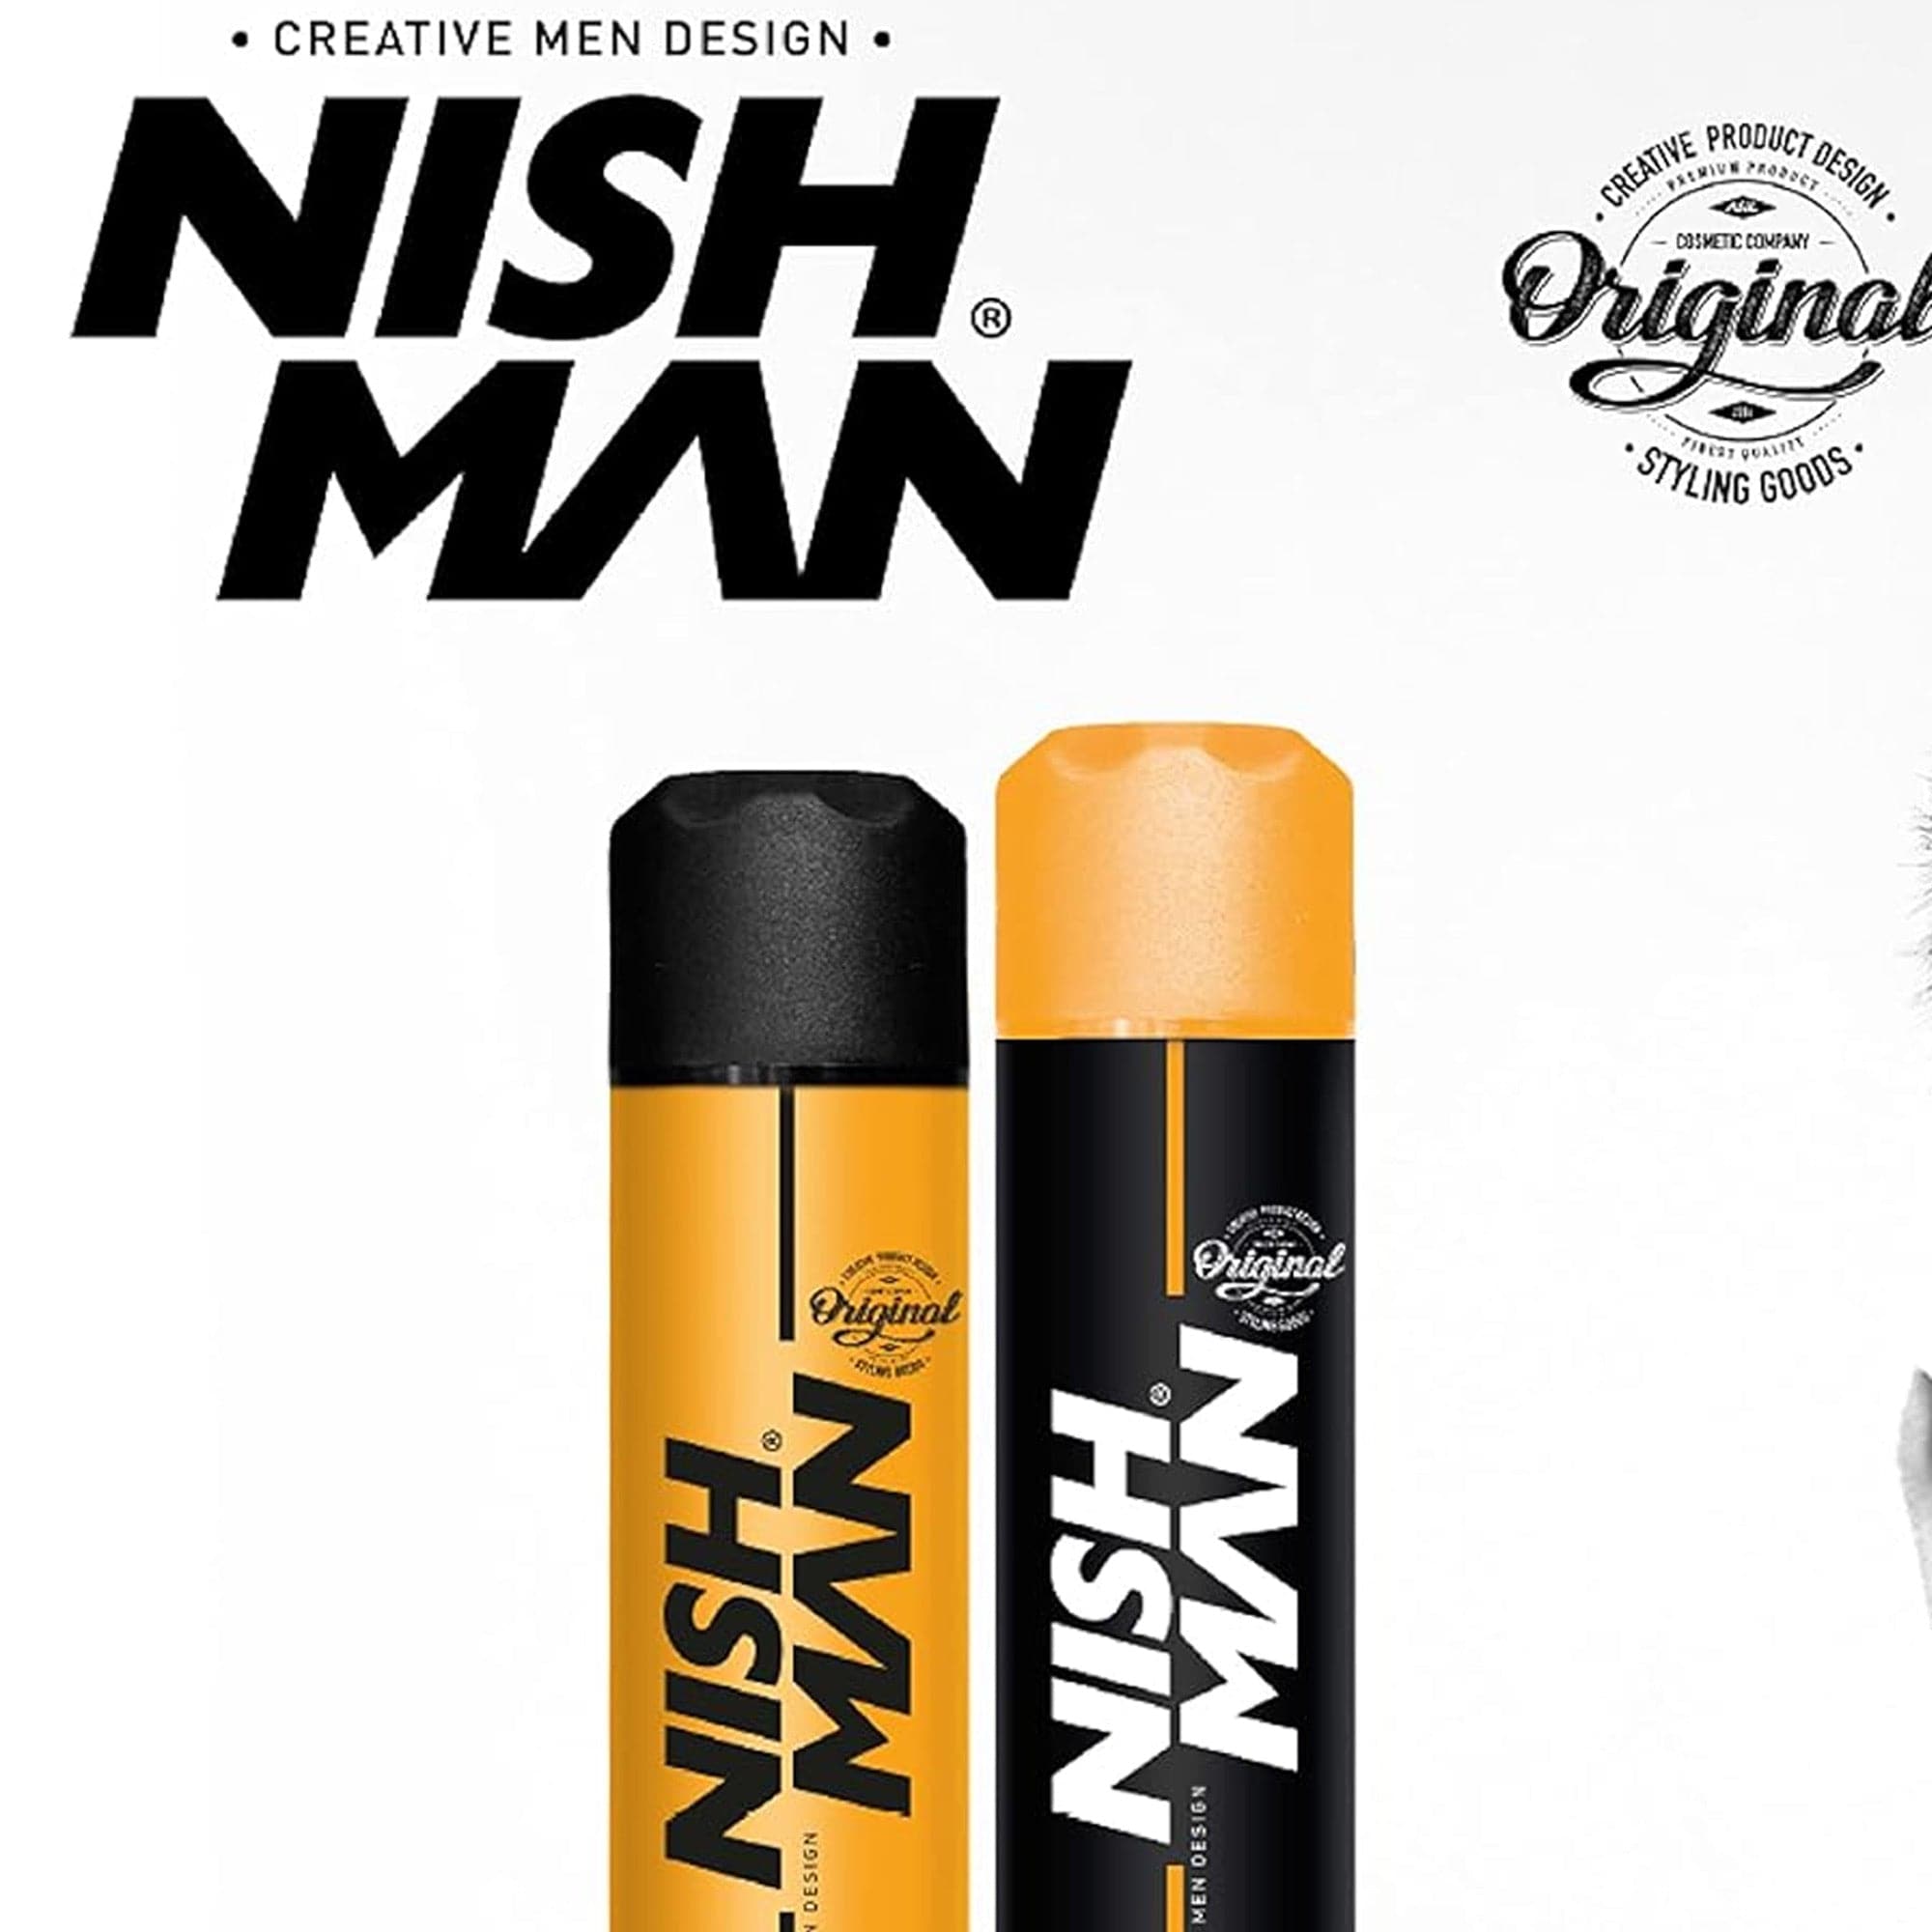 Nishman - Hair Styling Spray No.04 Extra Strong Hold 400ml